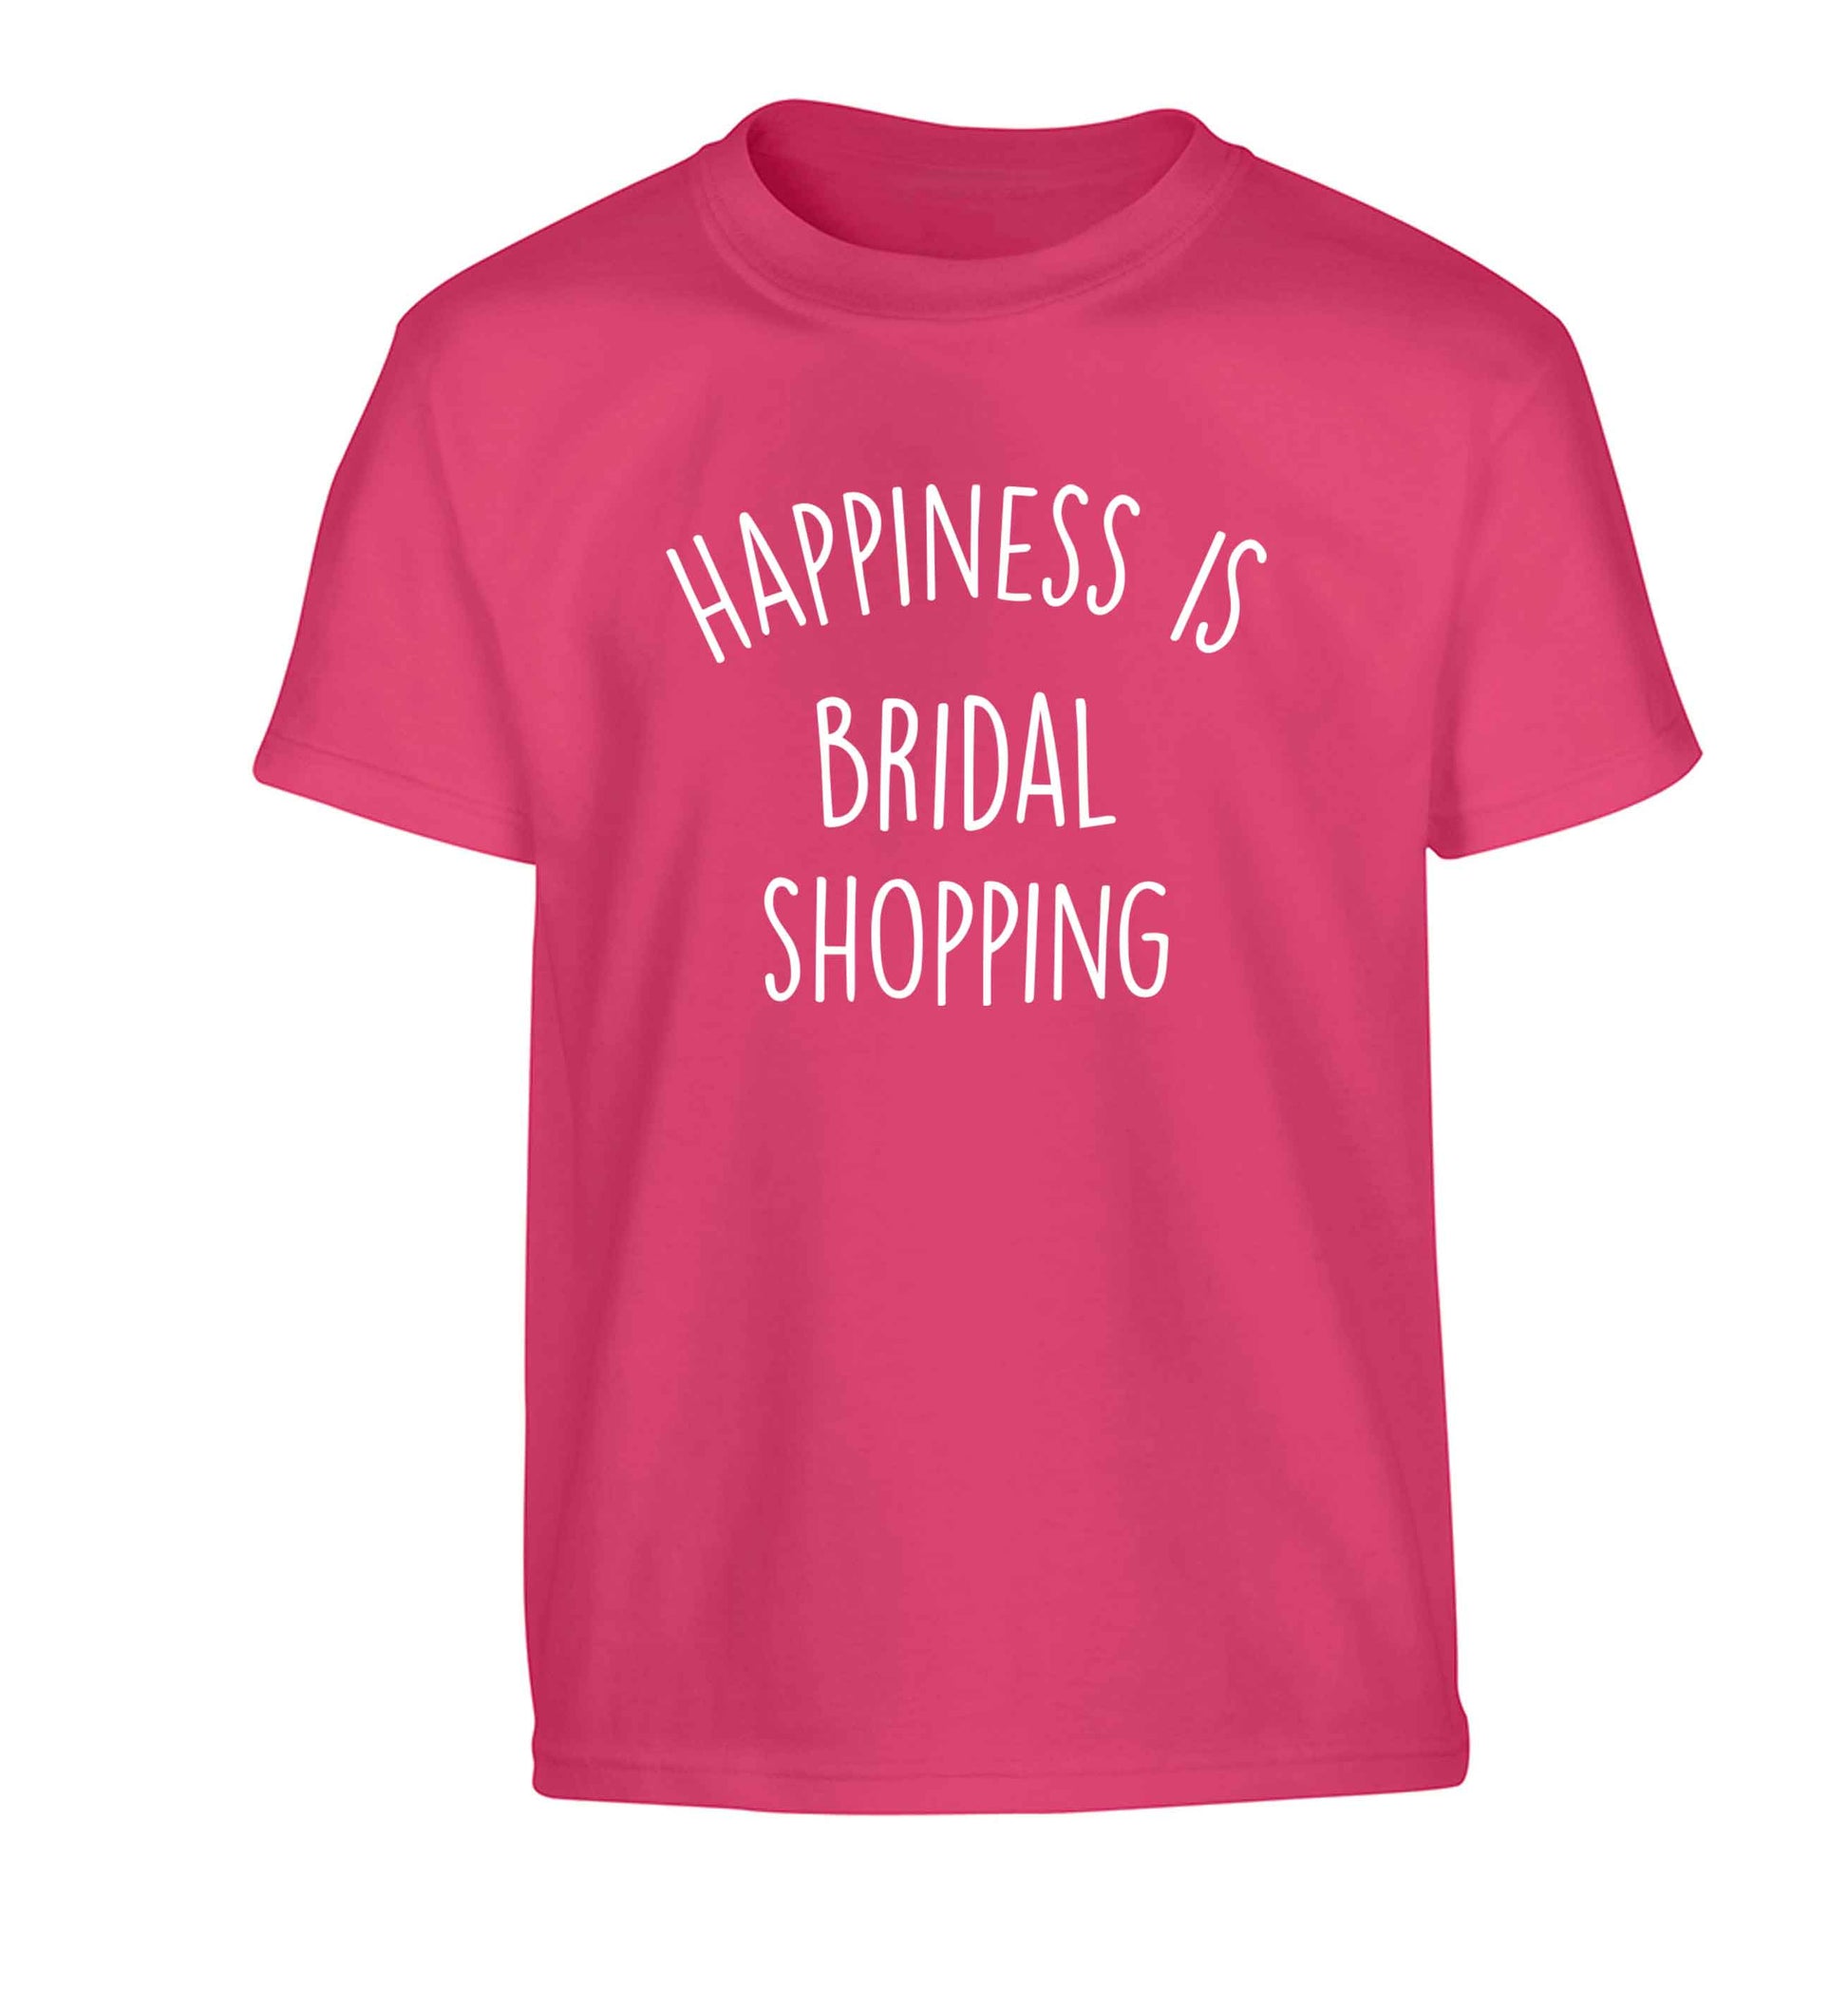 Happiness is bridal shopping Children's pink Tshirt 12-13 Years